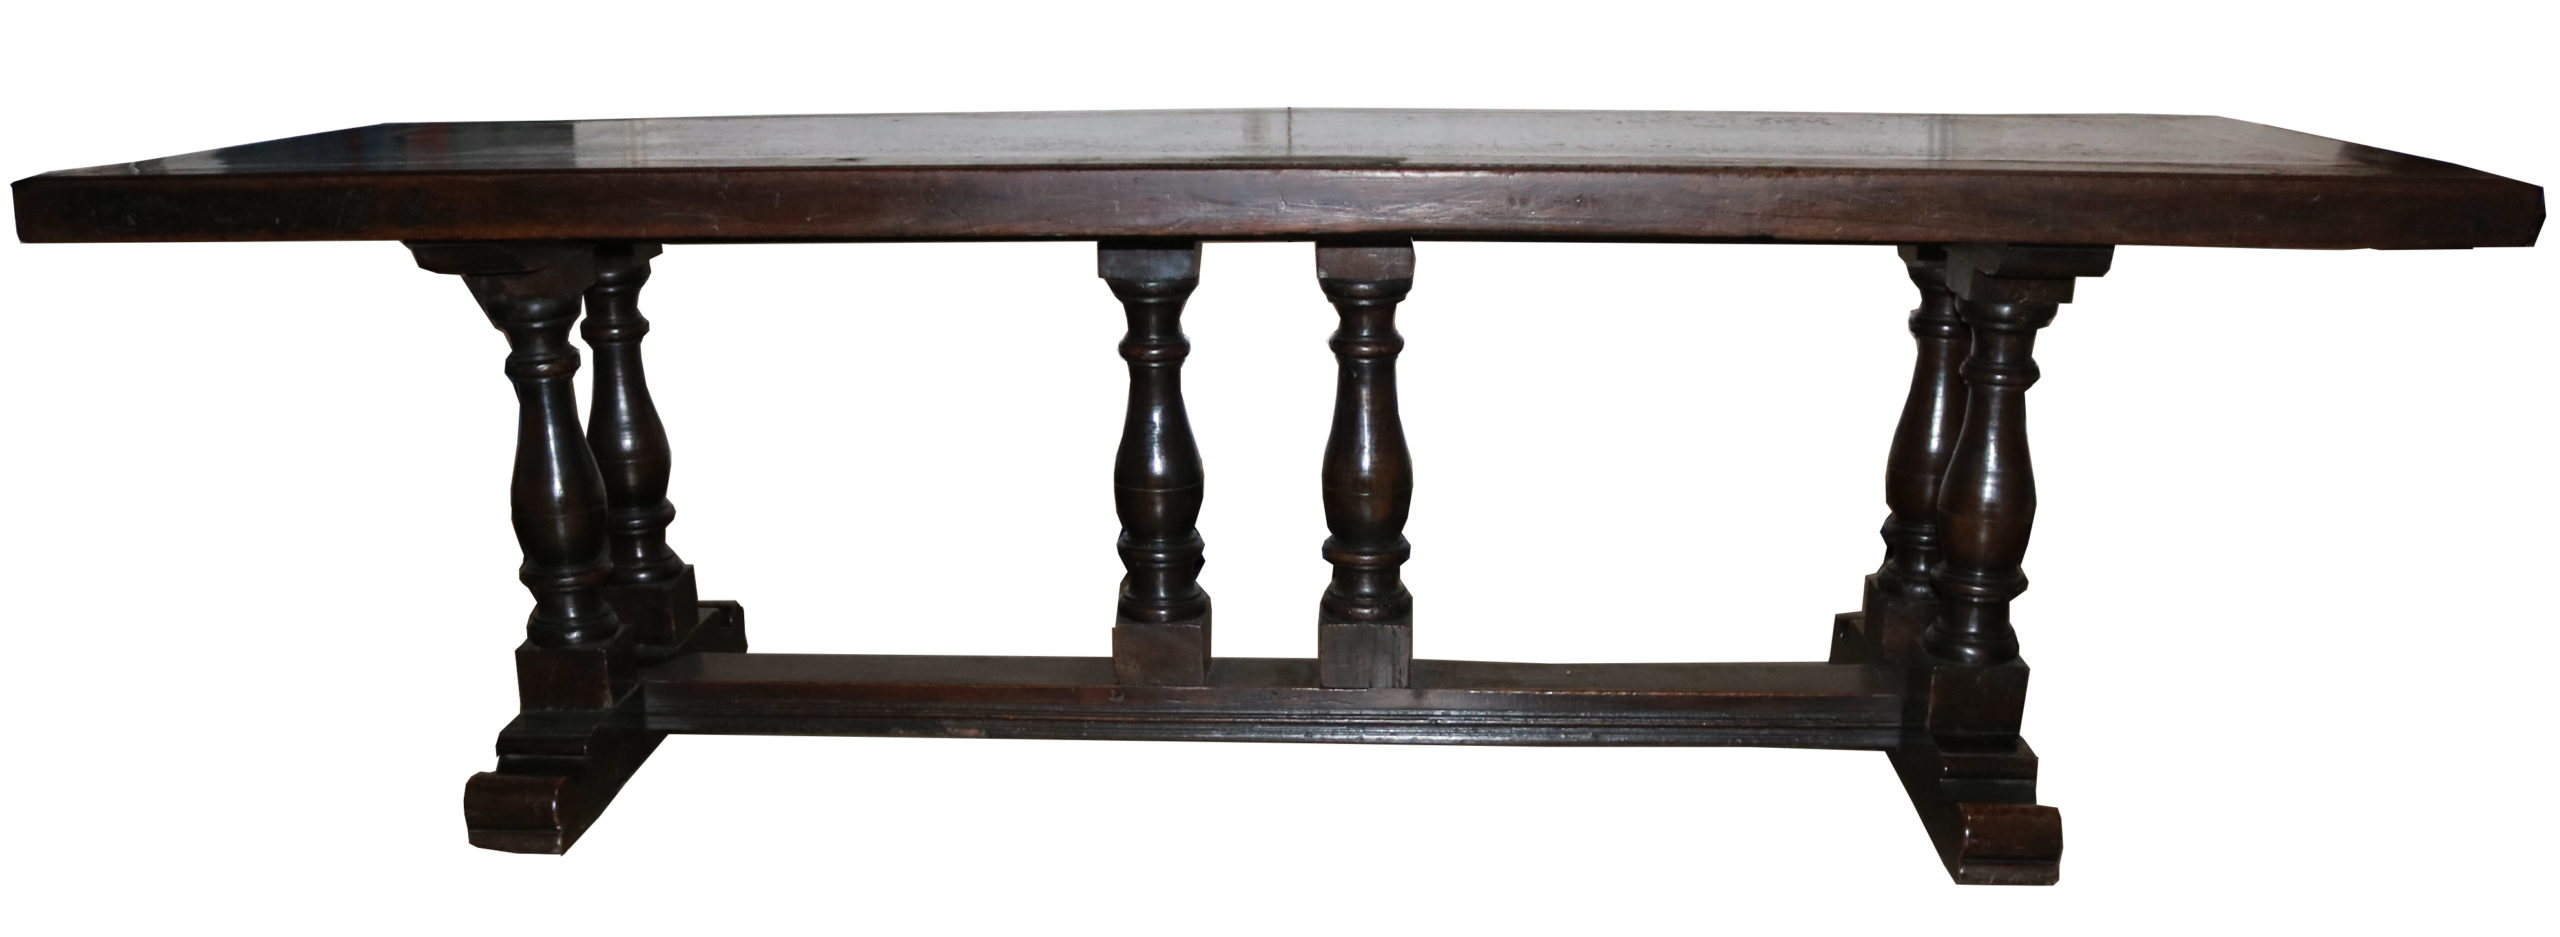 An 18th Century Walnut Tuscan Refractory Table No. 4825